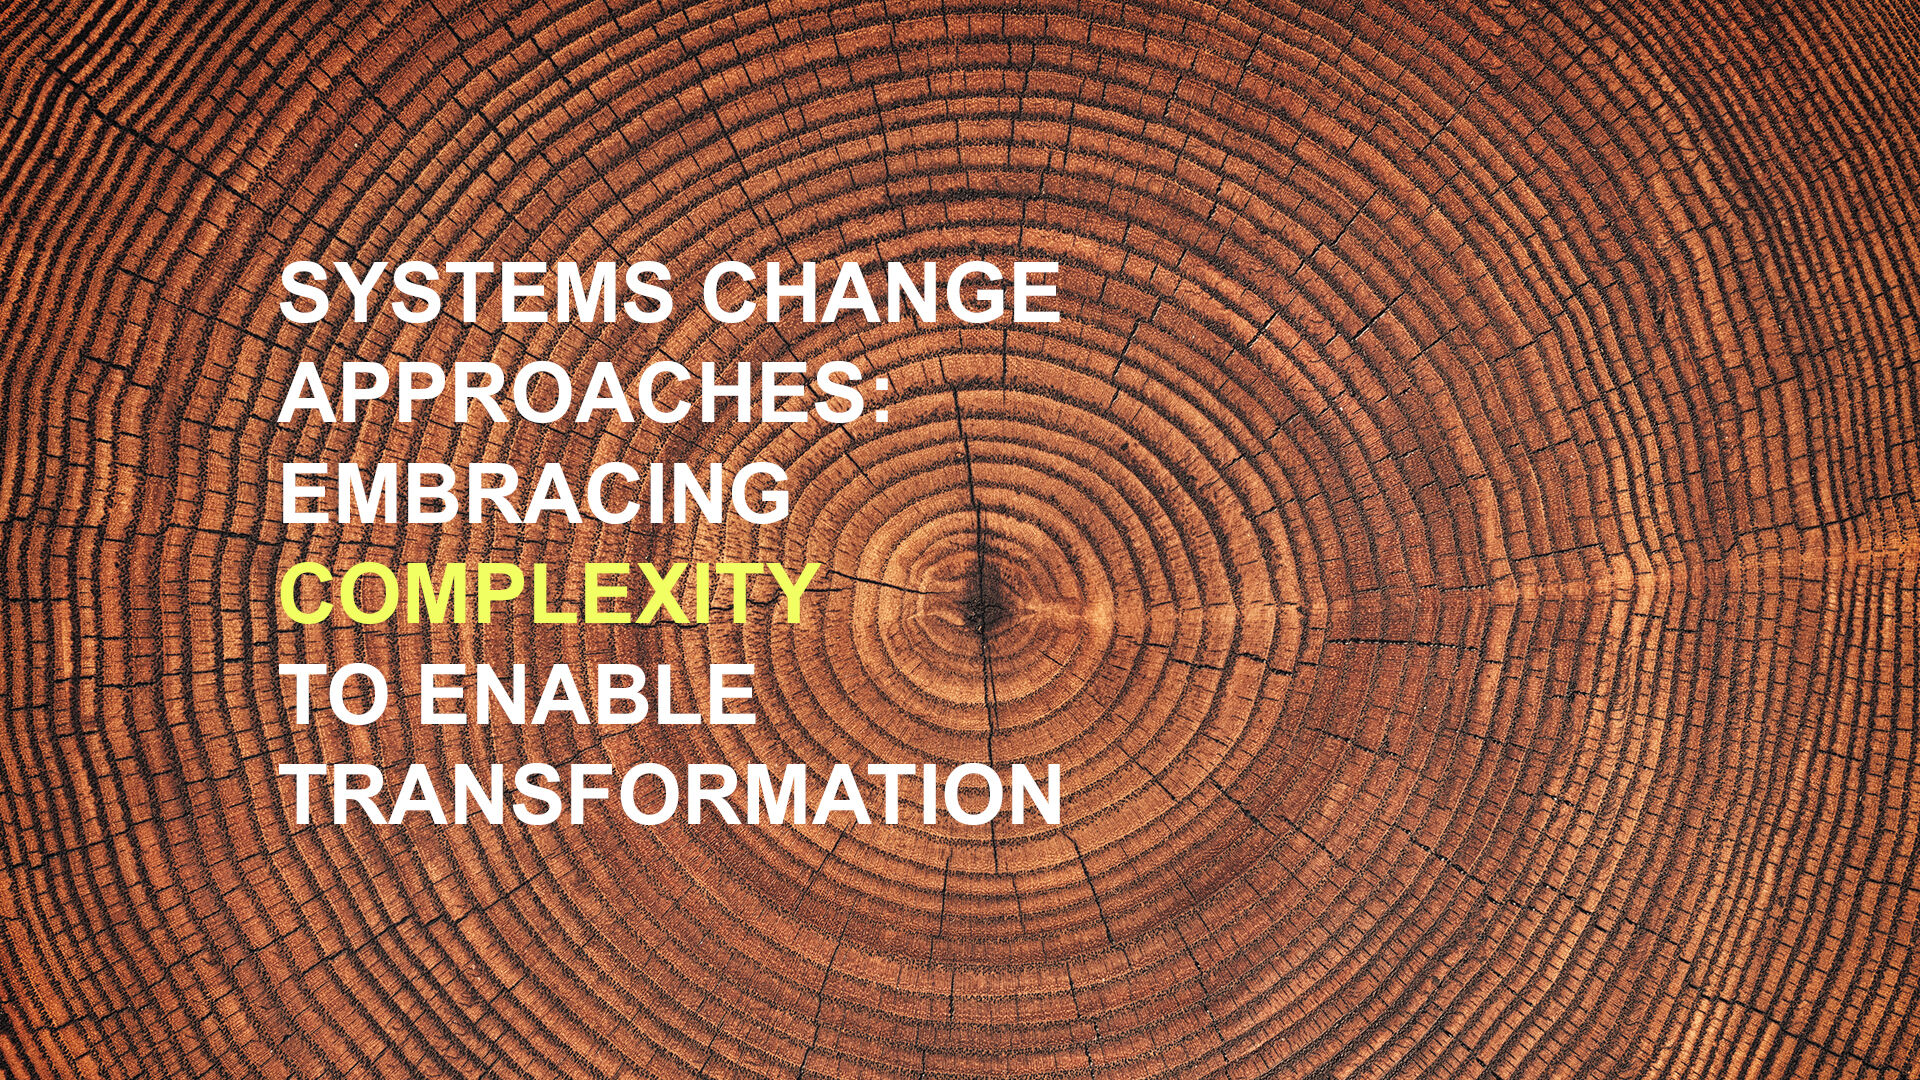 Systems change approaches: embracing complexity to enable transformation